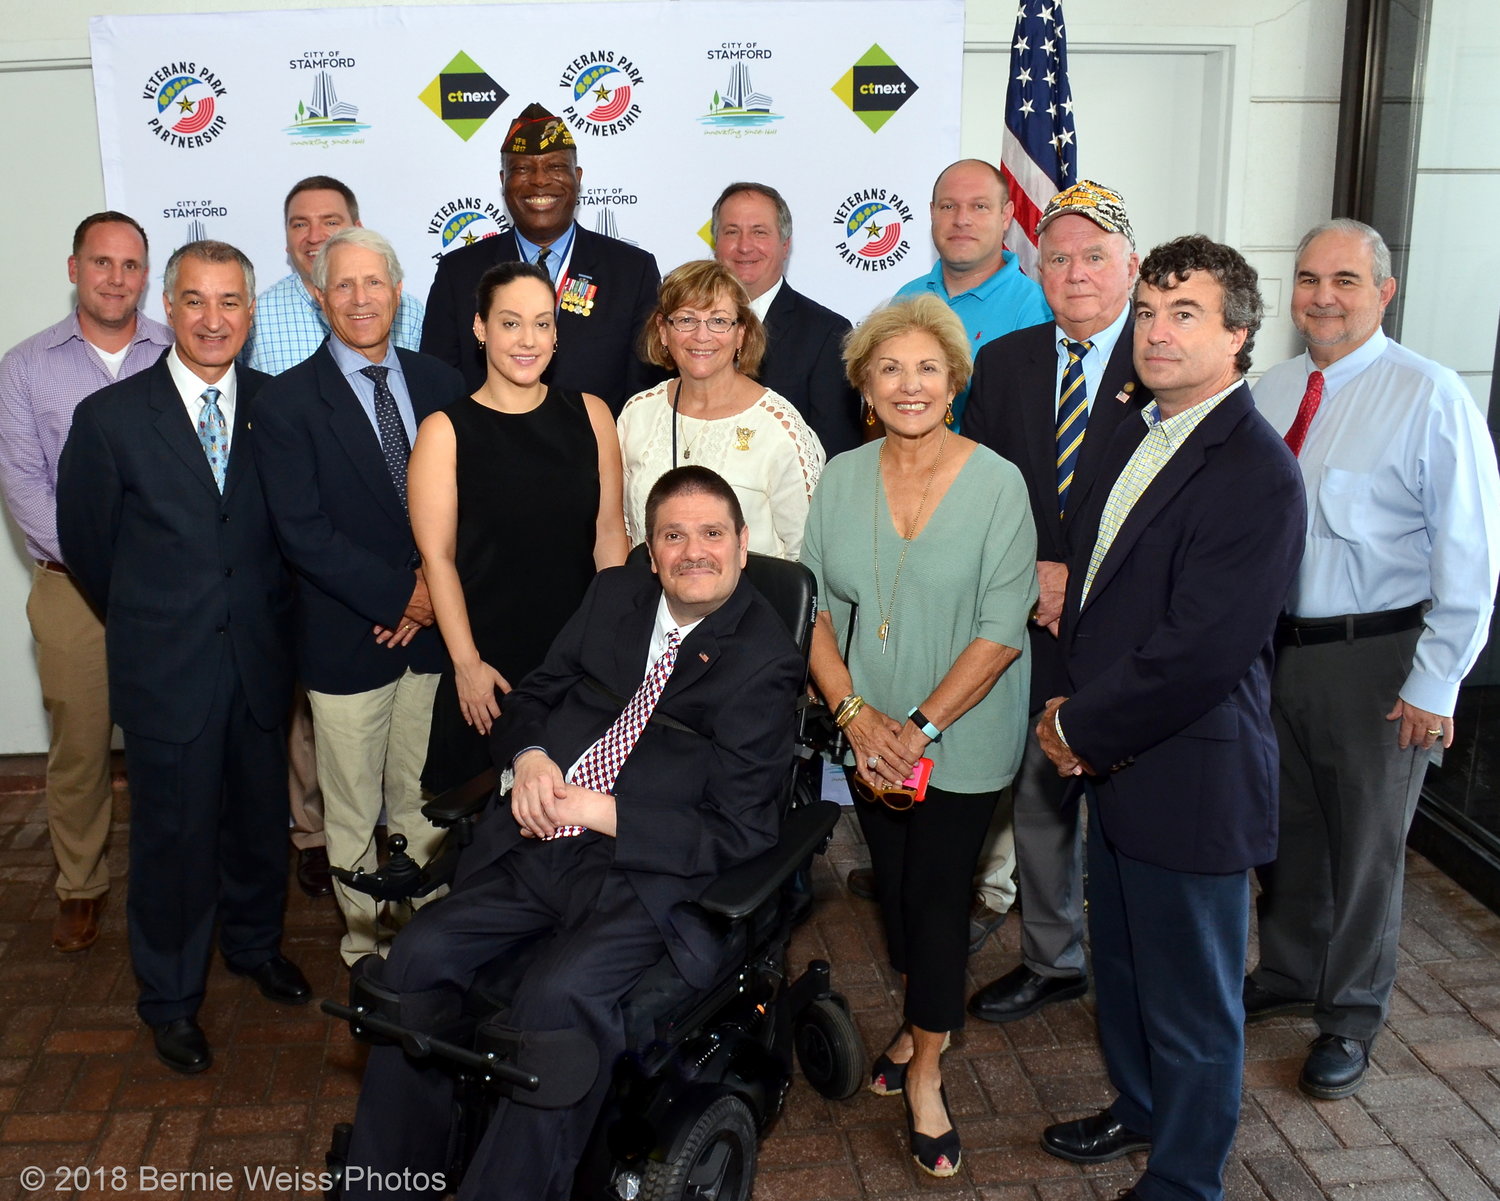 A picture of veterans and Veteran's Park Project board members